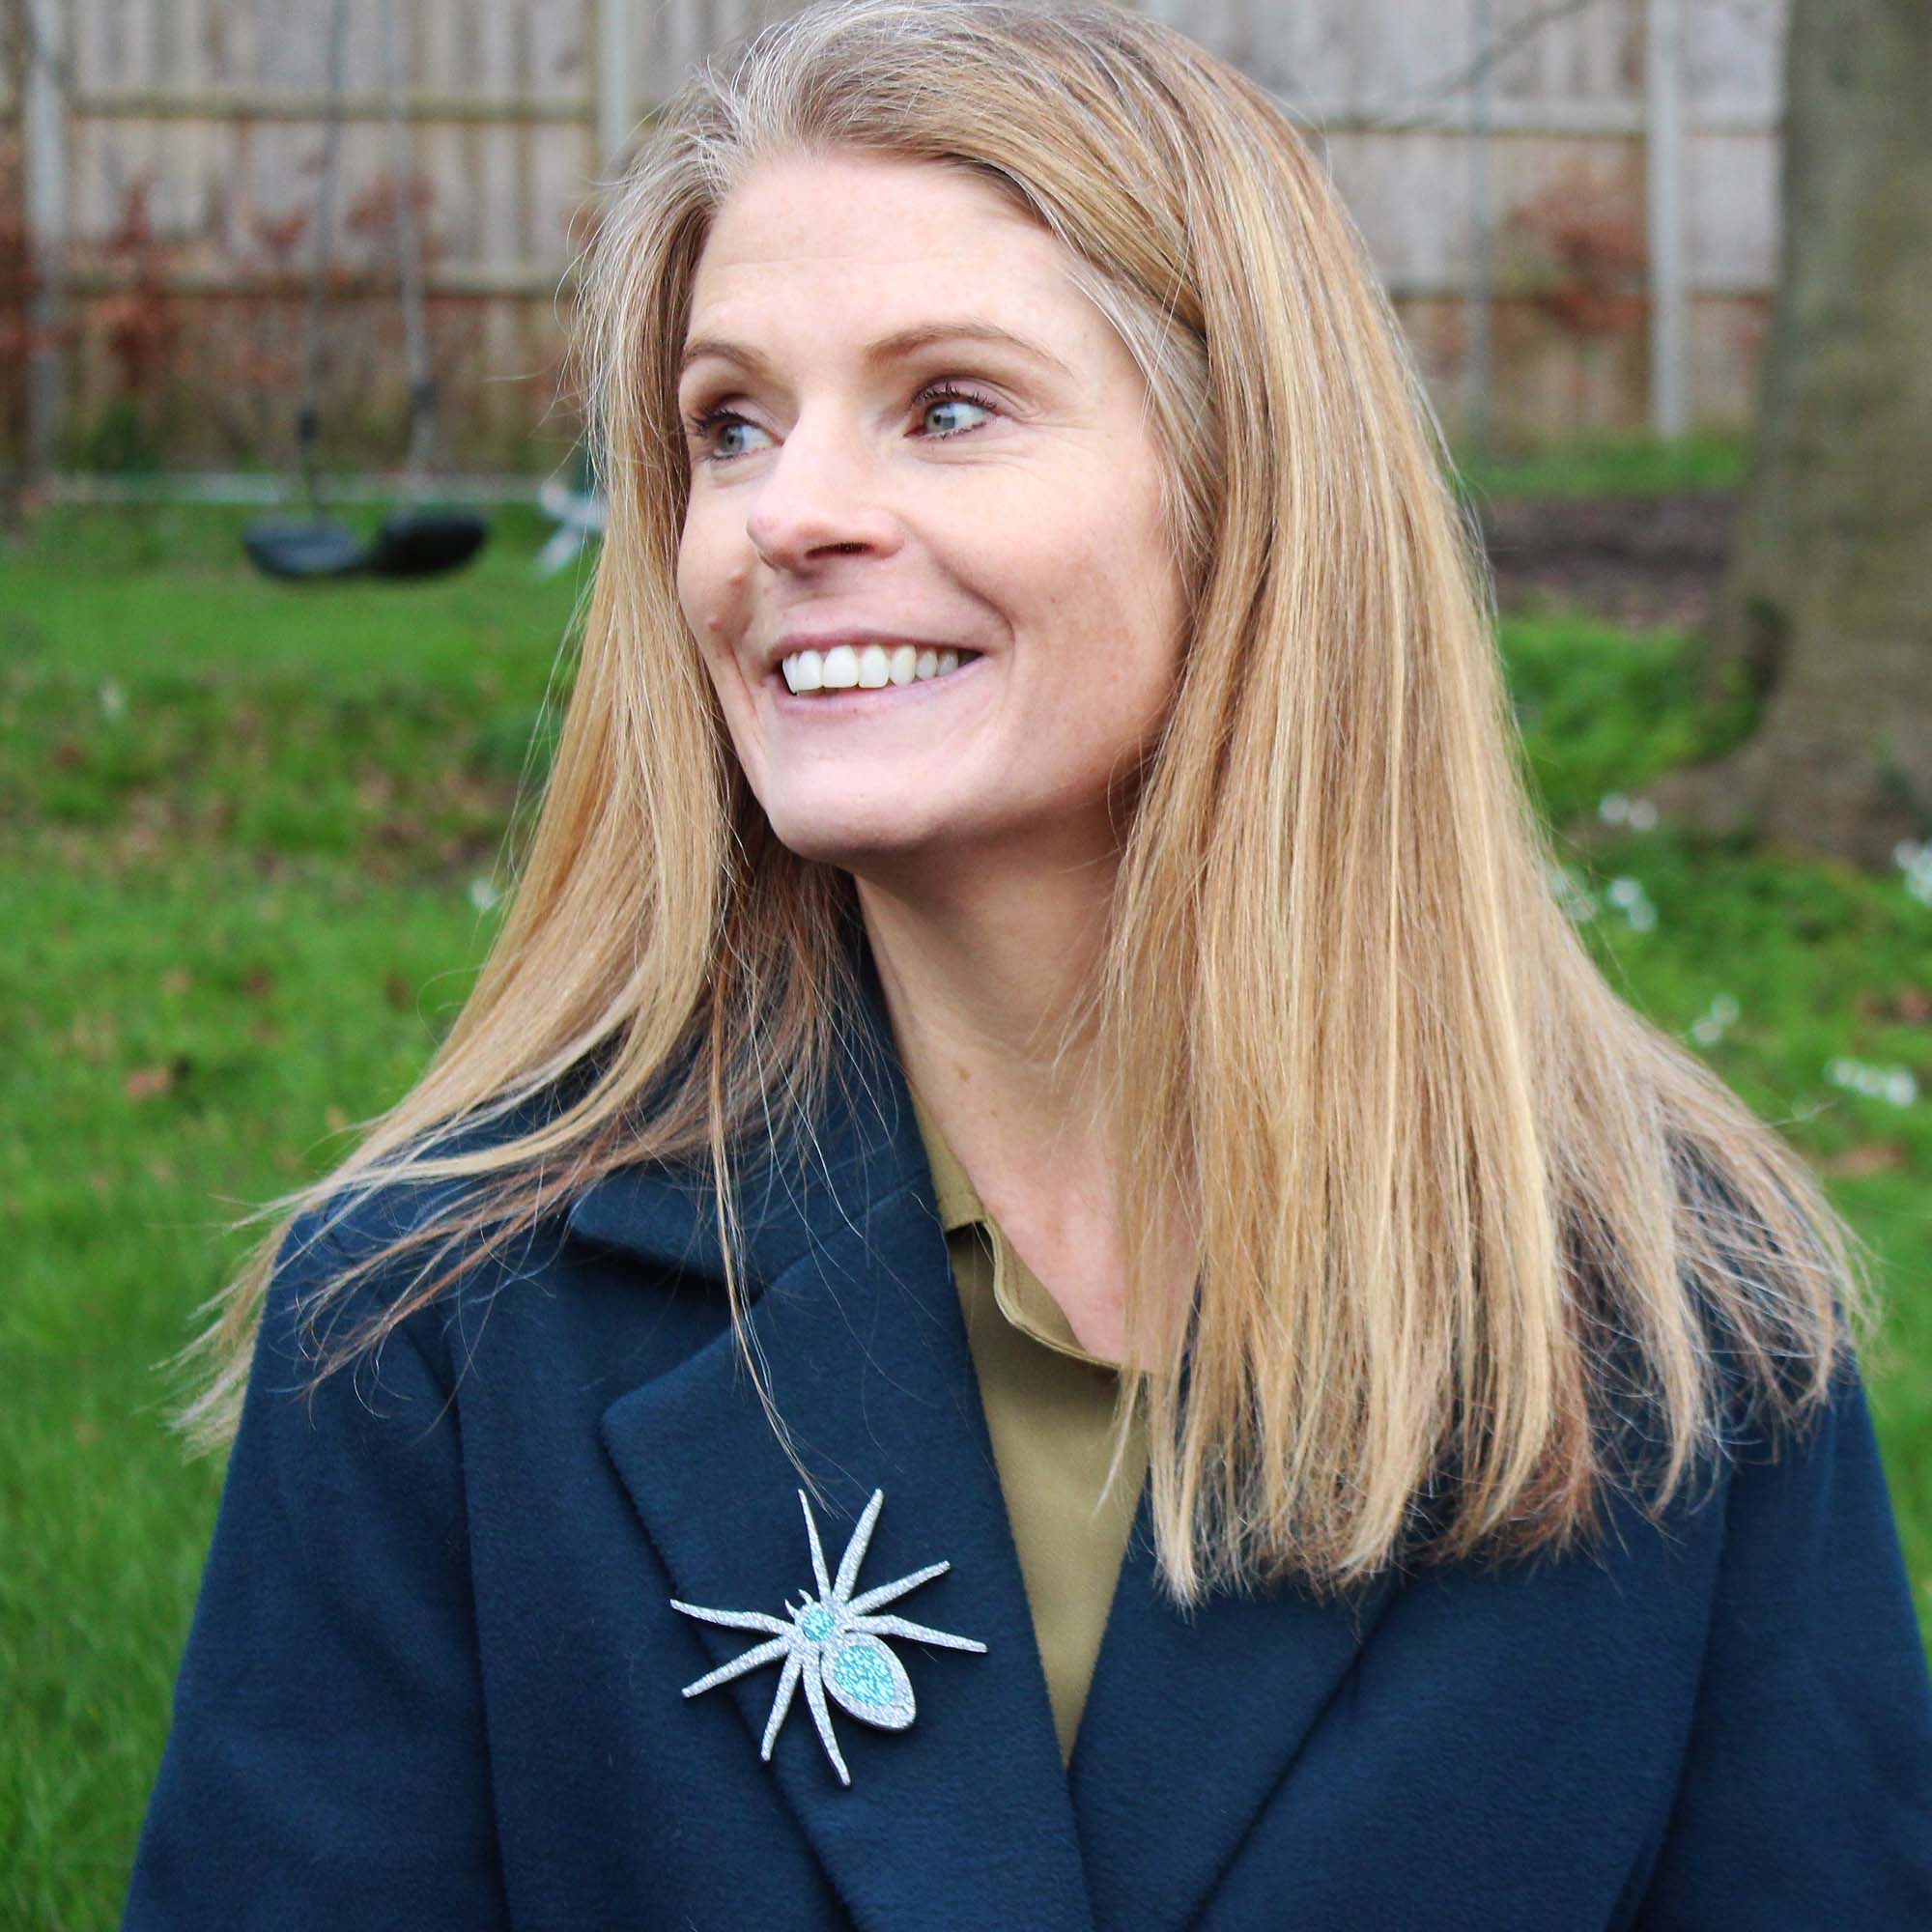 Sarah Day, the founder of Wear and Resist wears a spider brooch